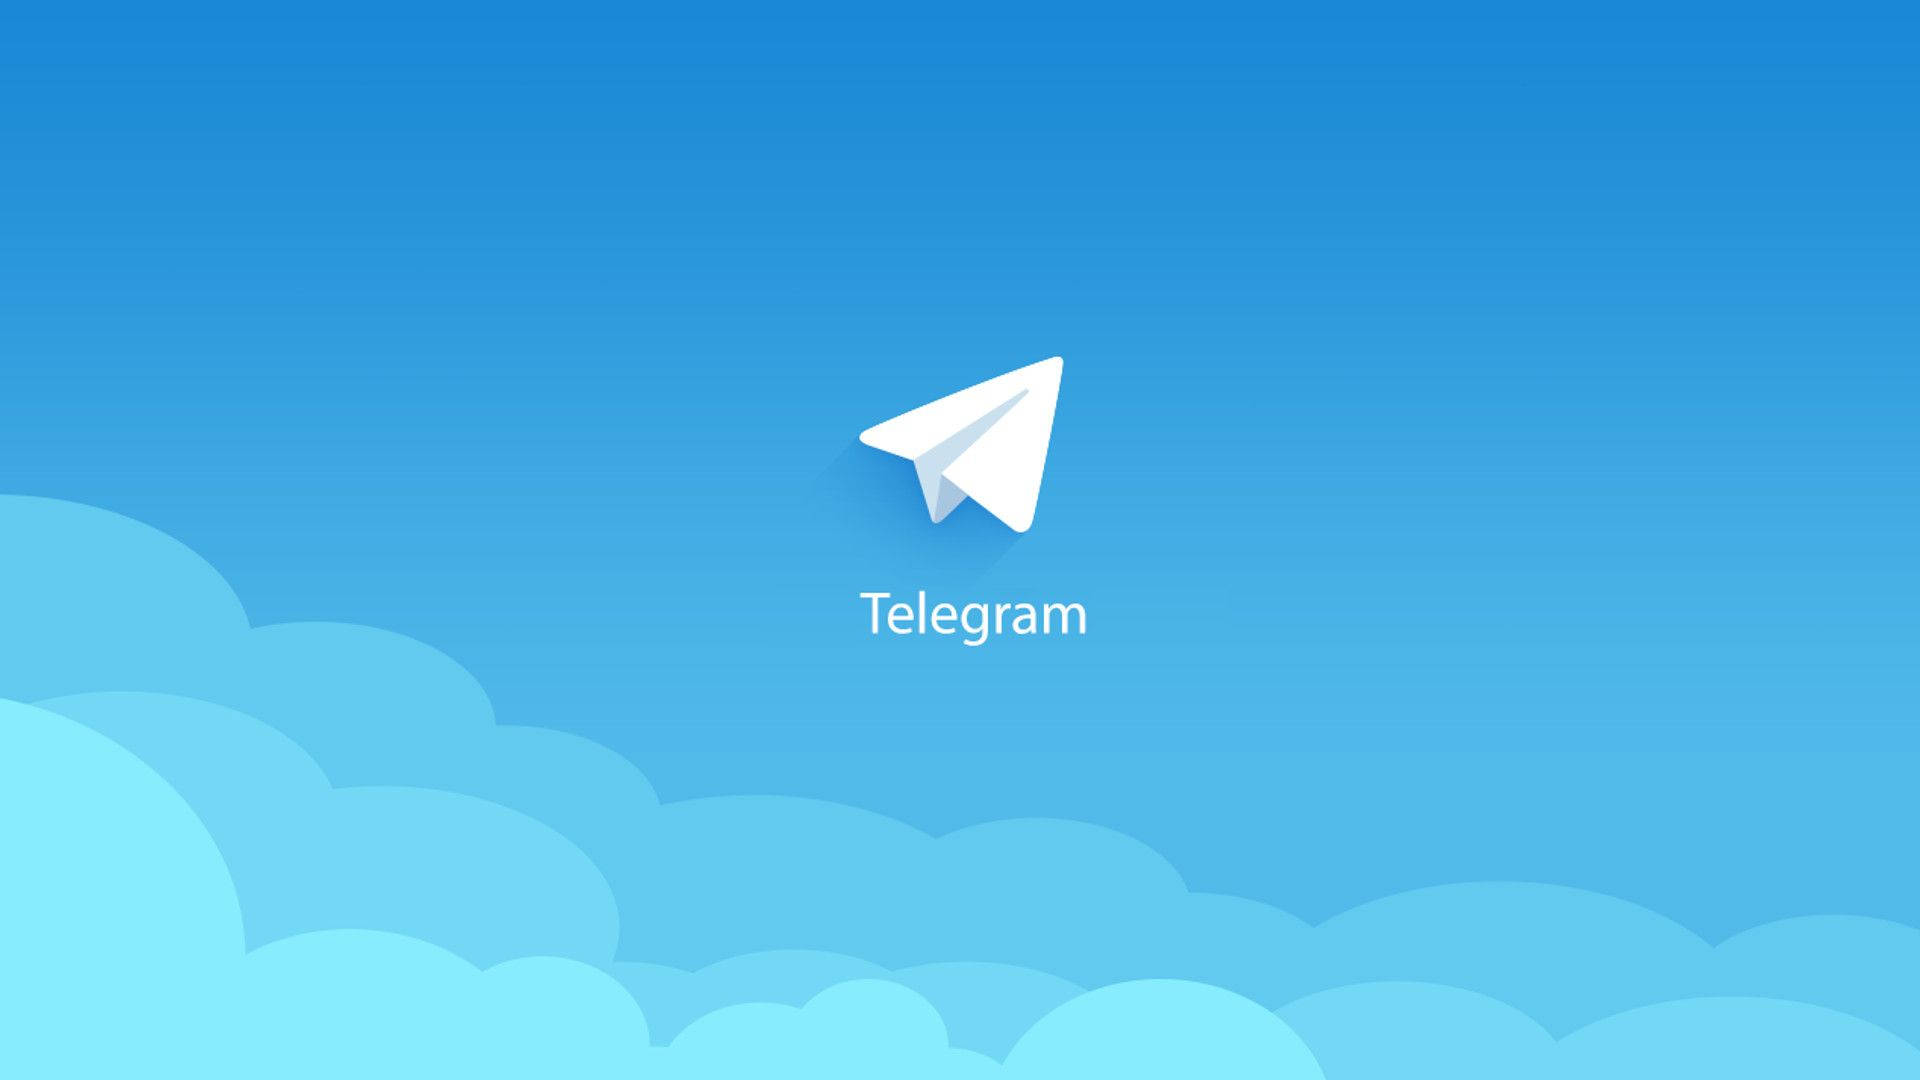 Telegram Clouds With Word Background